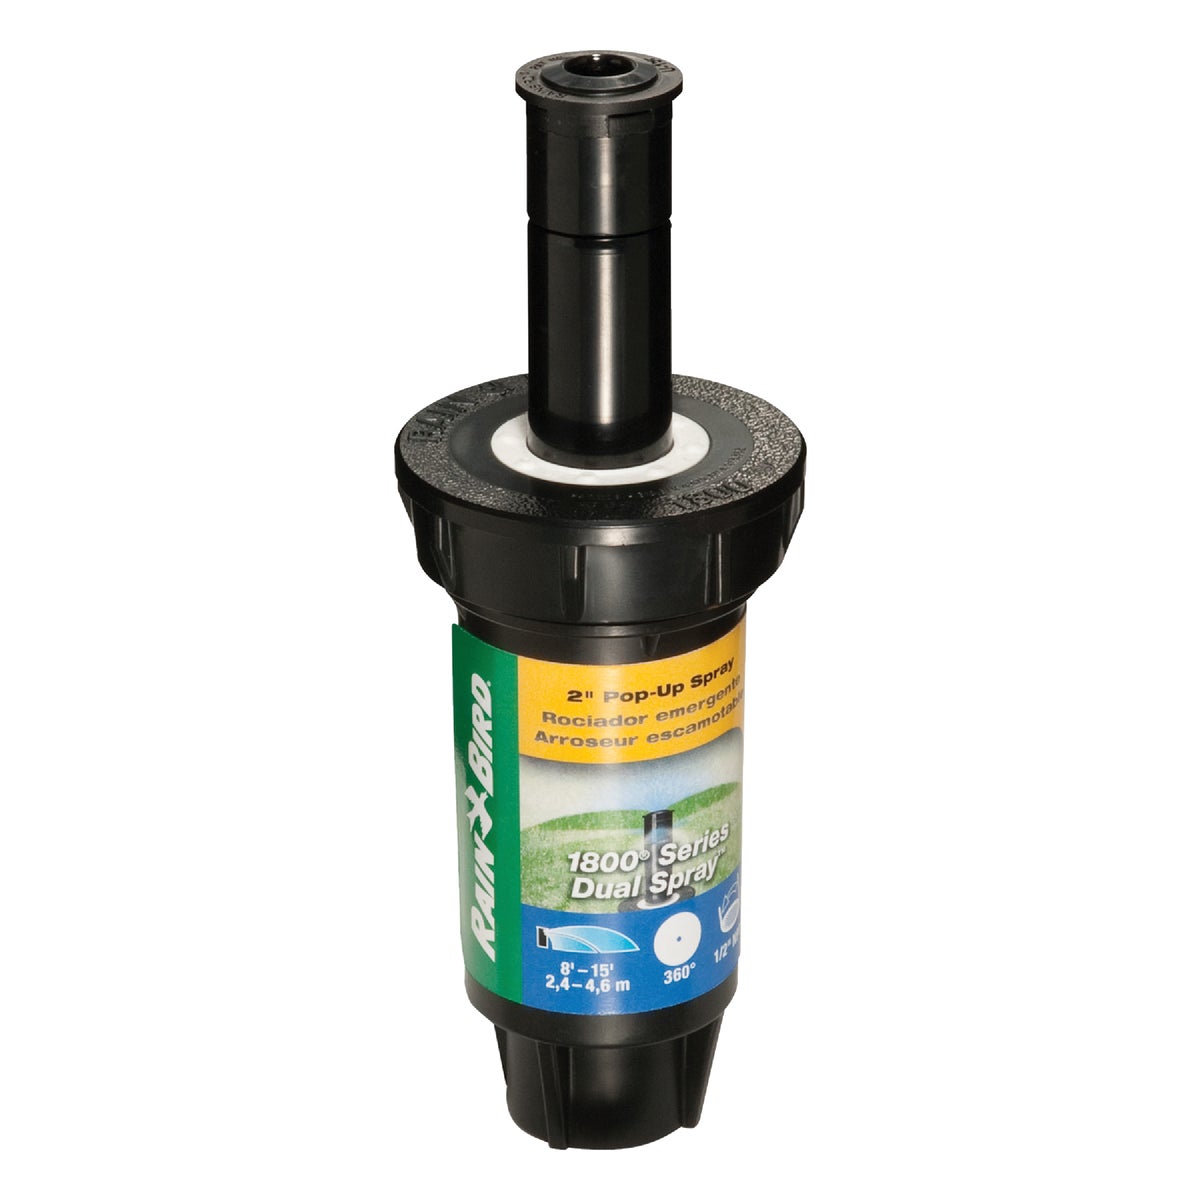 Item 704321, Professional pop-up sprinkler with a dual spray nozzle.